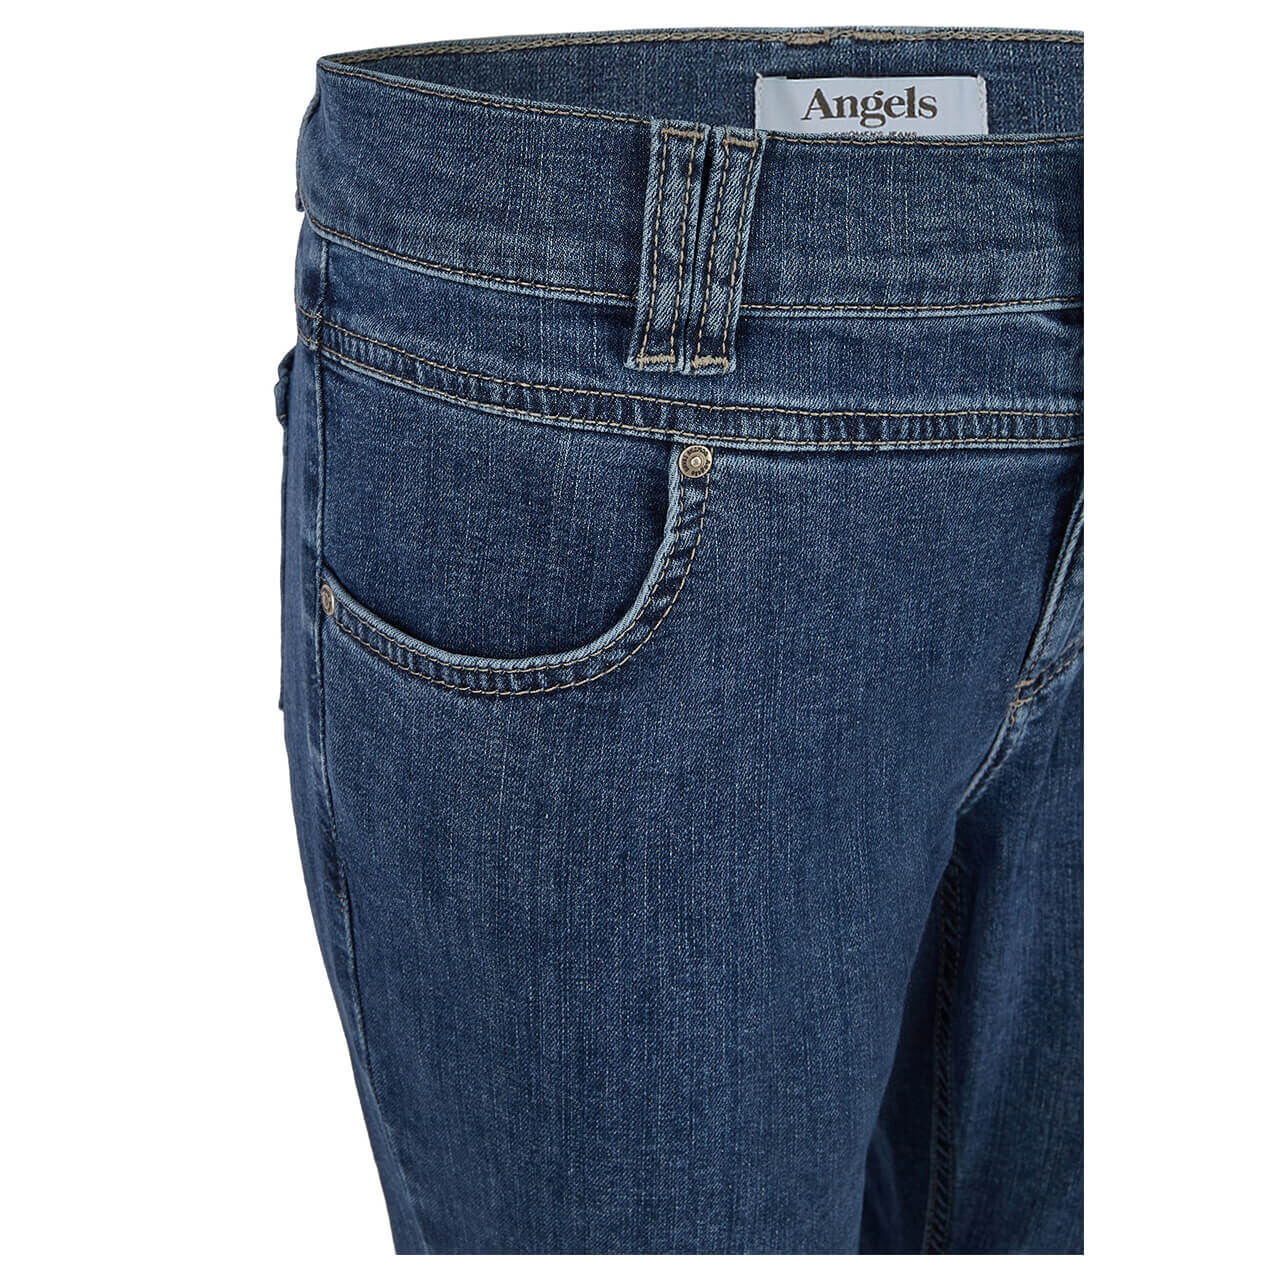 Angels Skinny Button Jeans mid blue